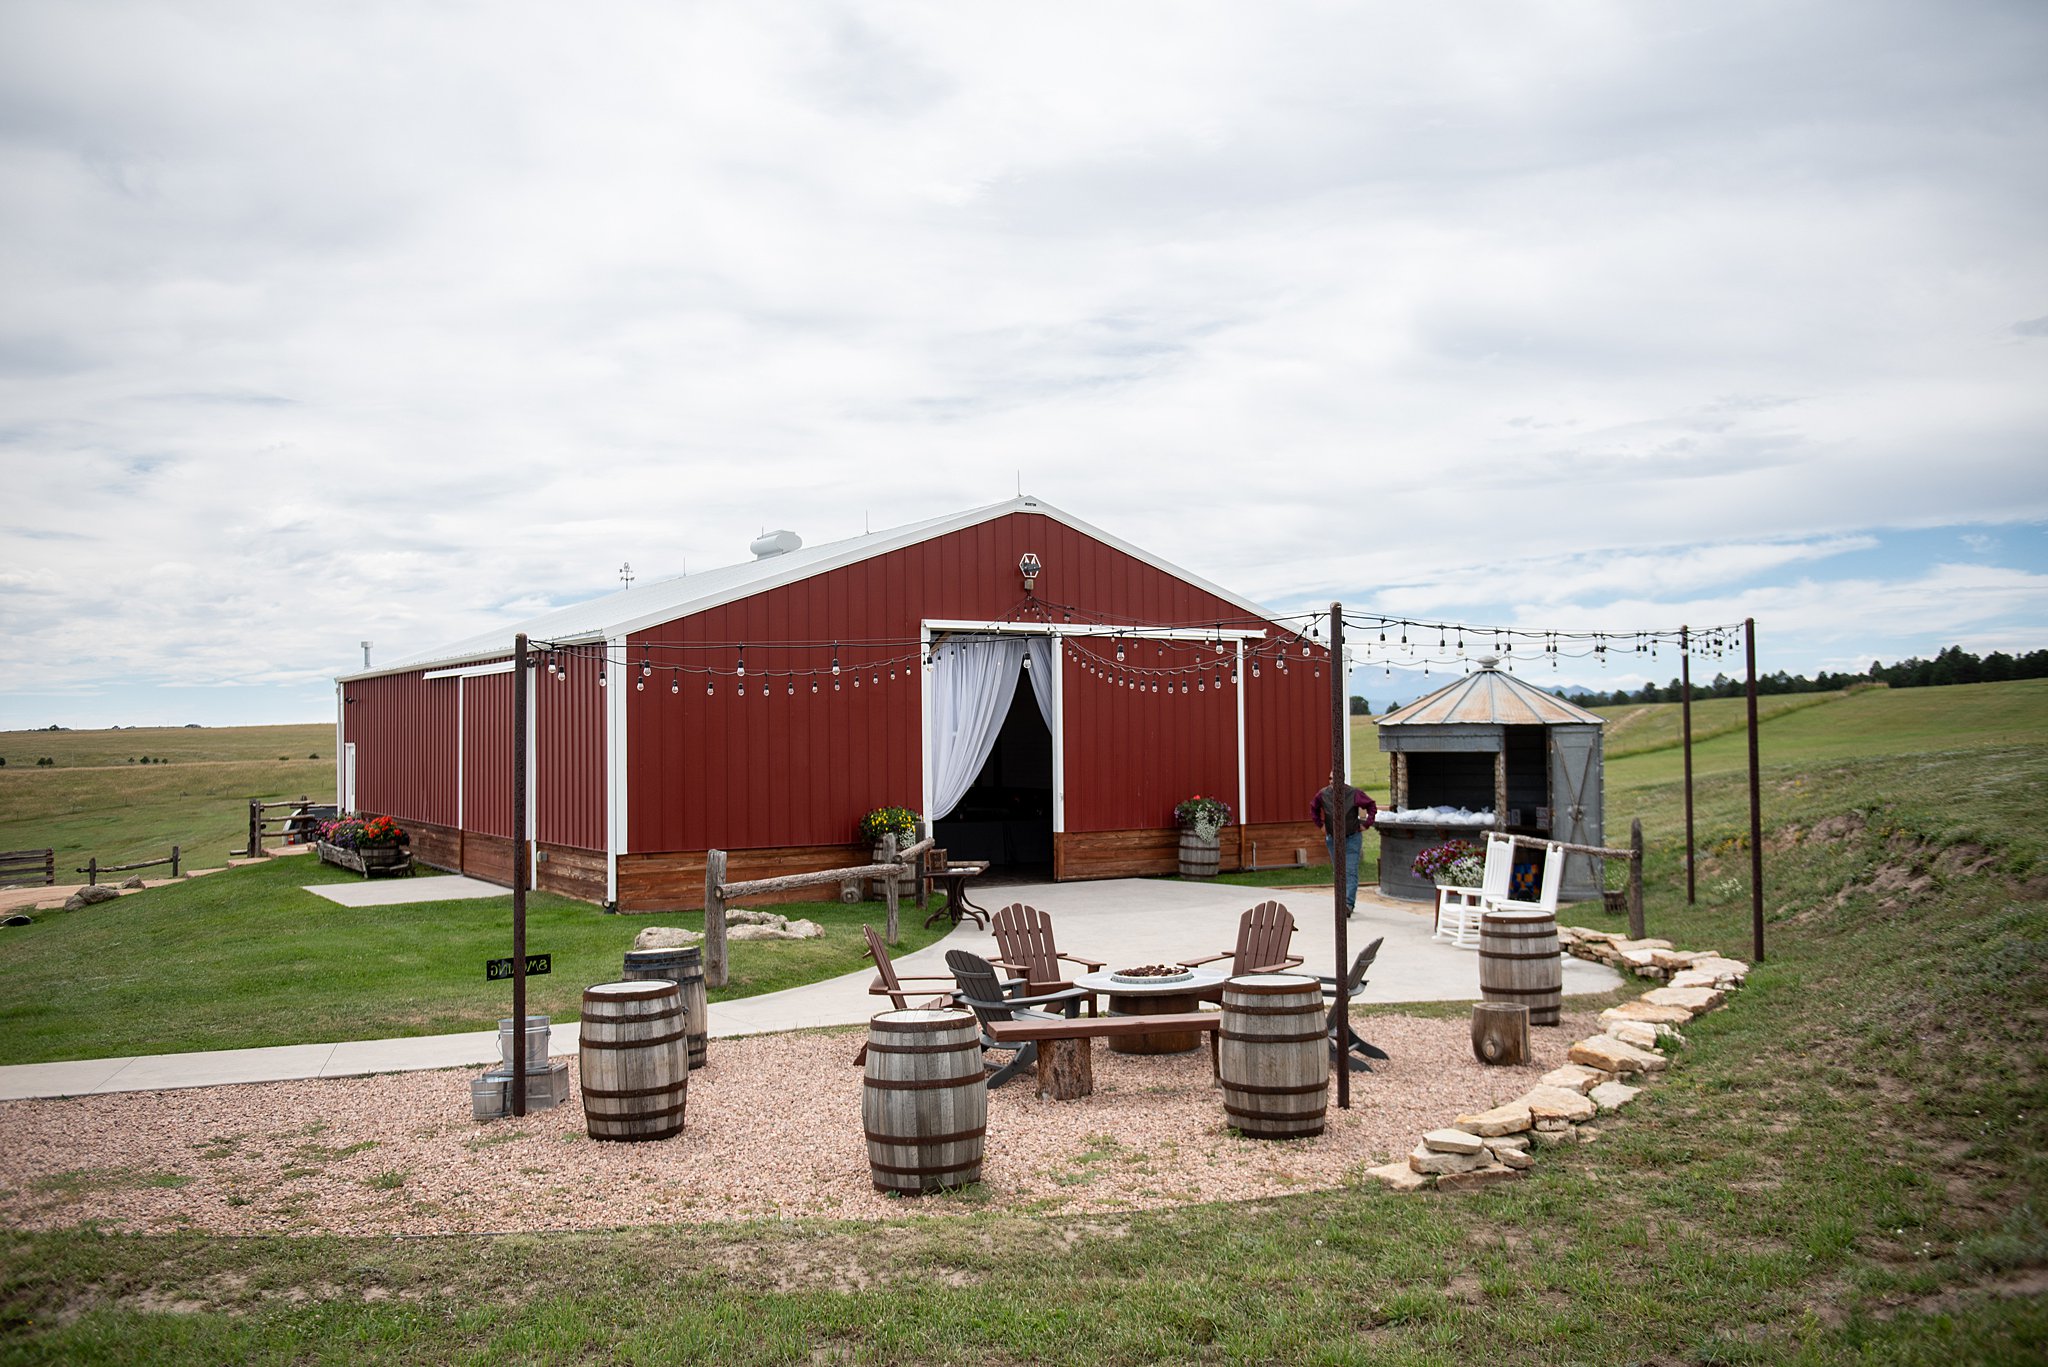 Details of a wedding reception patio outside a barn